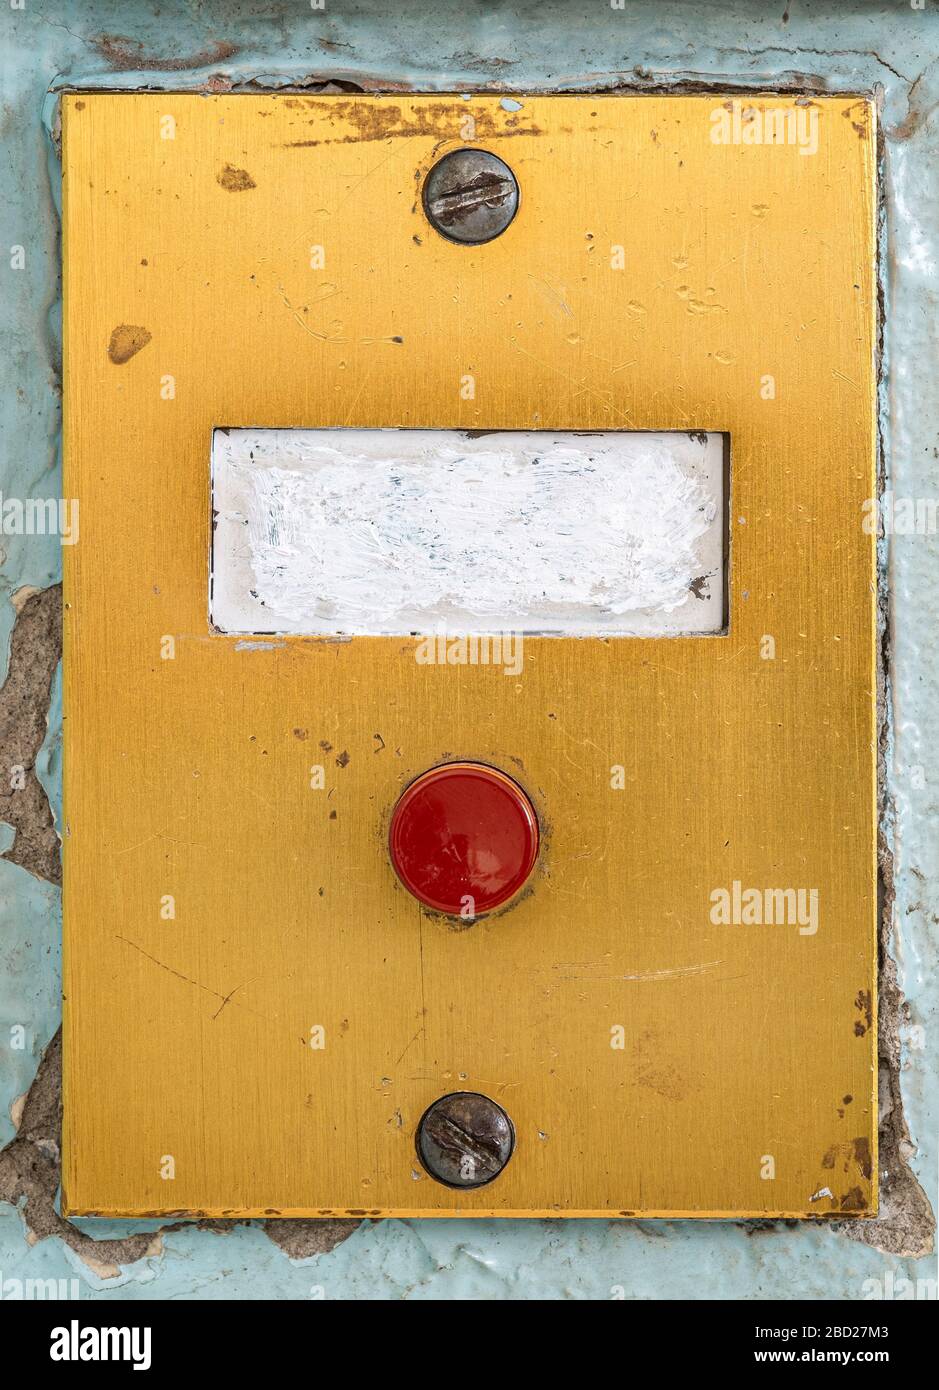 old doorbell plate with blank erased label and red button Stock Photo